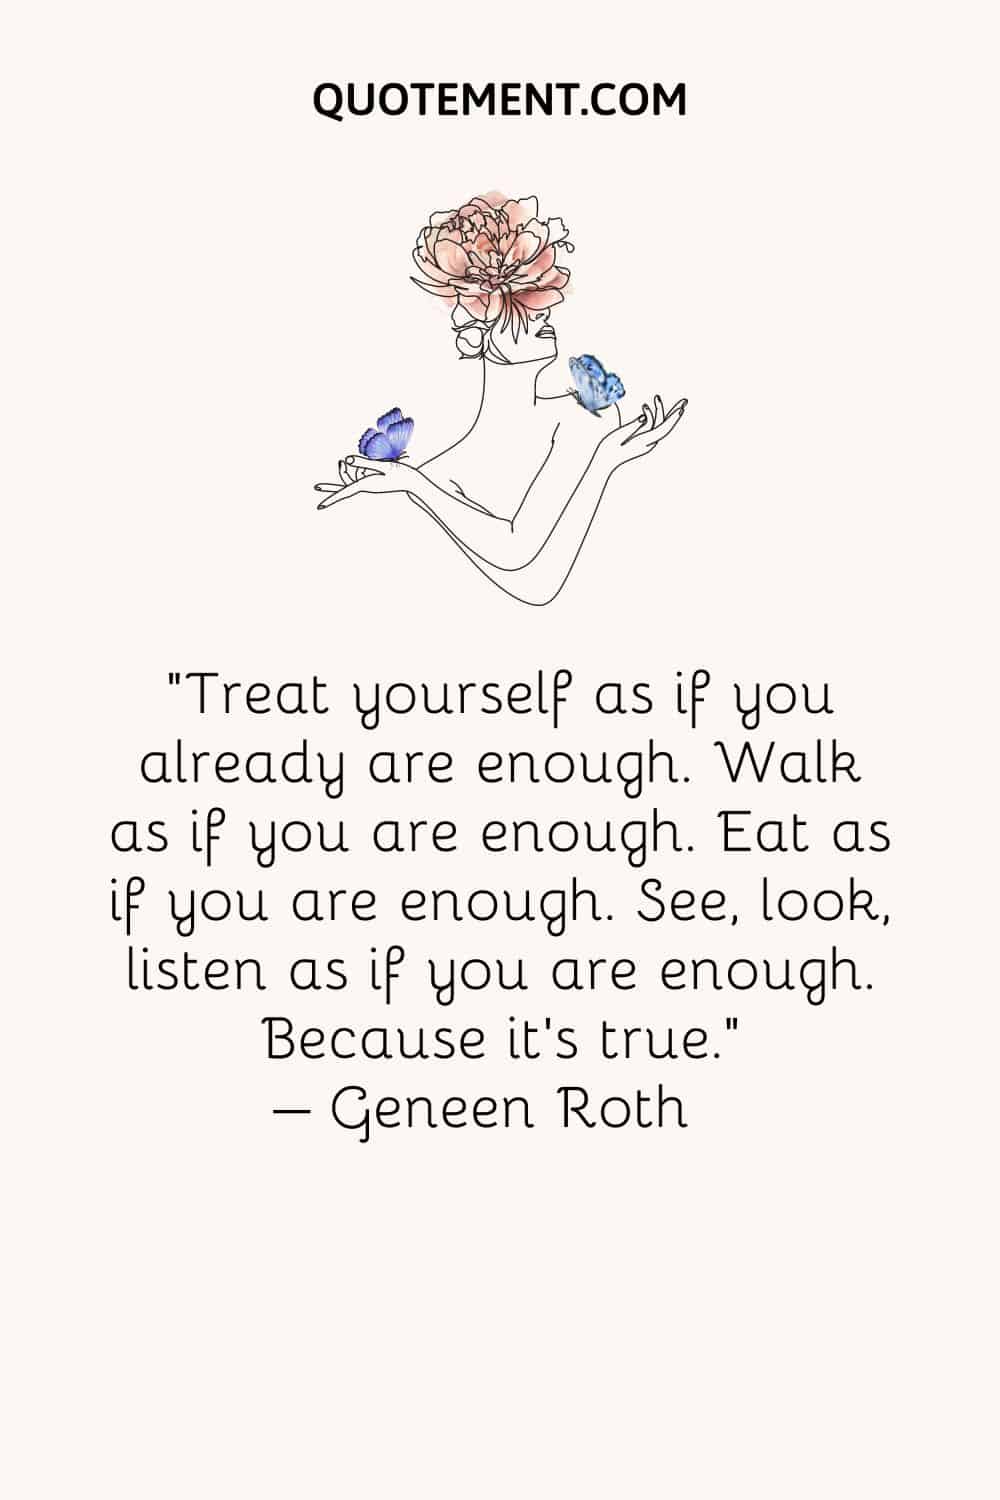 Treat yourself as if you already are enough